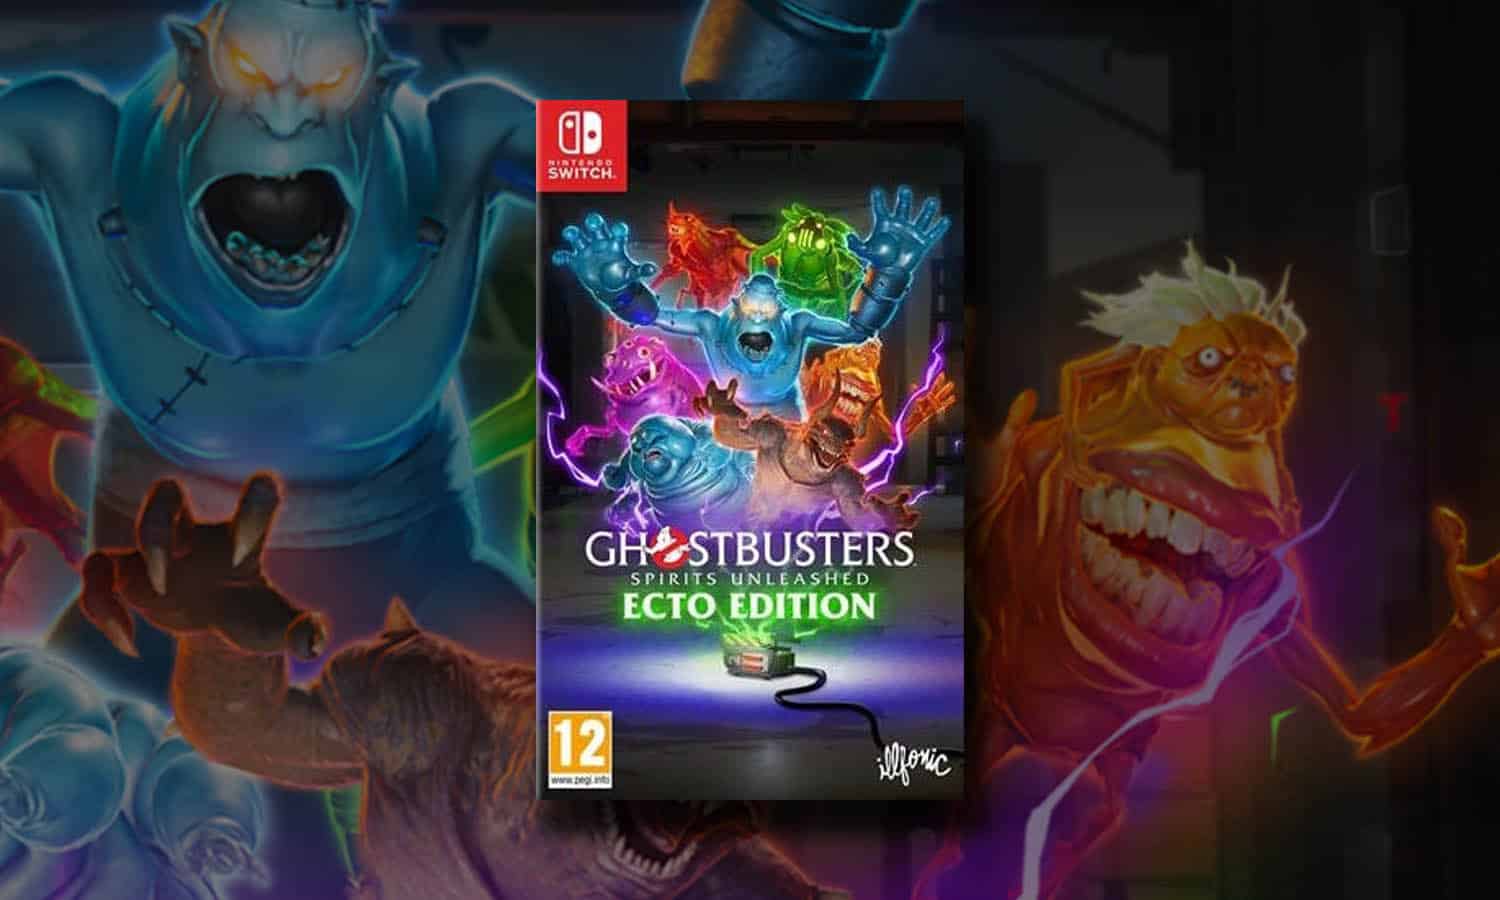 SLIDER Ghostbusters Spirits Unleashed Switch ecto edition